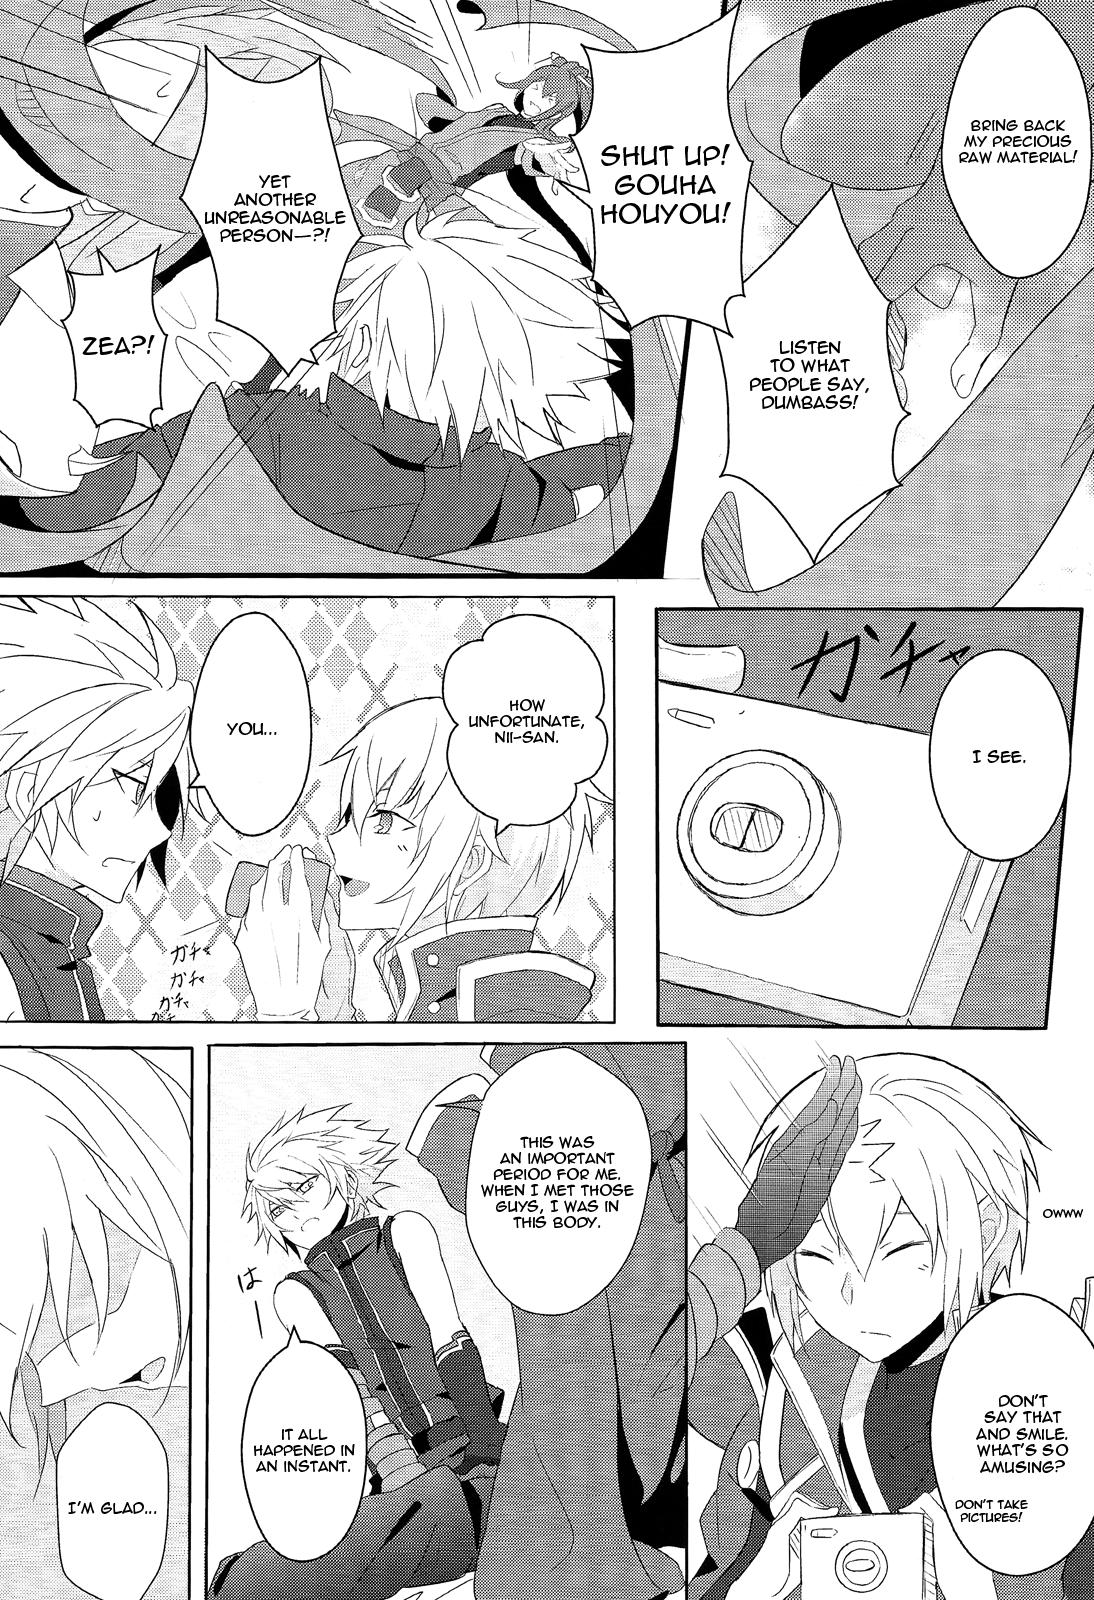 Passivo Taking Back Time - Blazblue Classy - Page 7